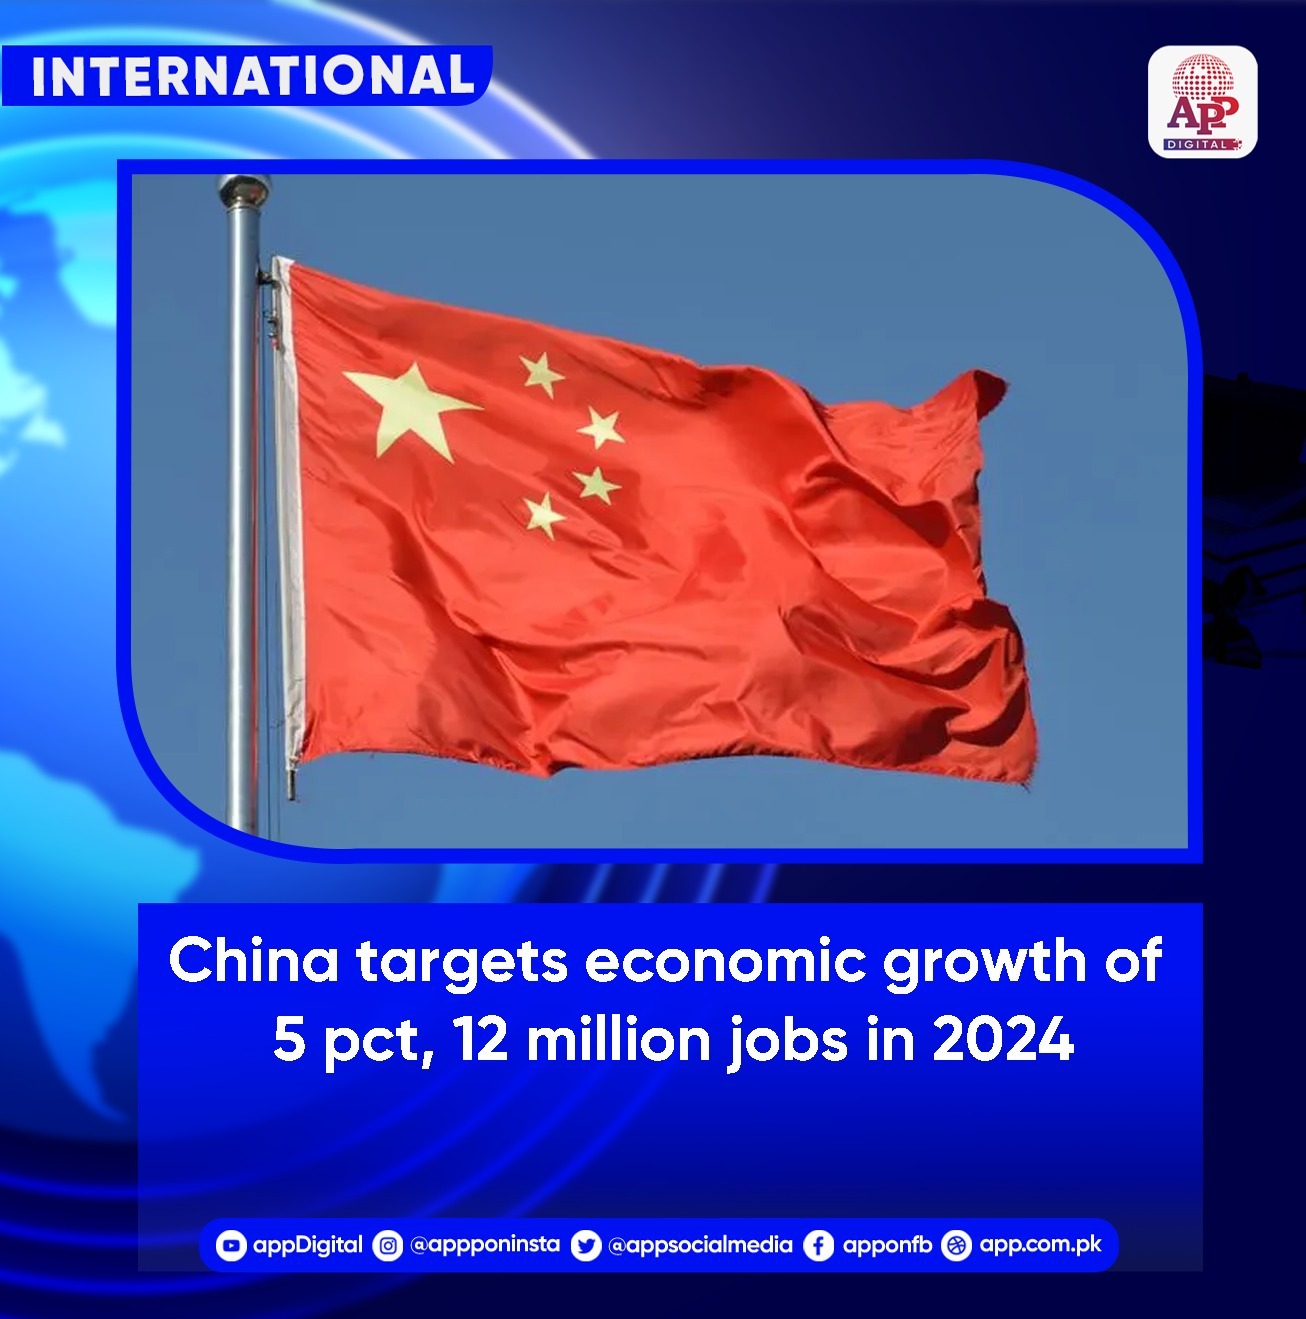 China targets economic growth of 5 pct, 12 million jobs in 2024